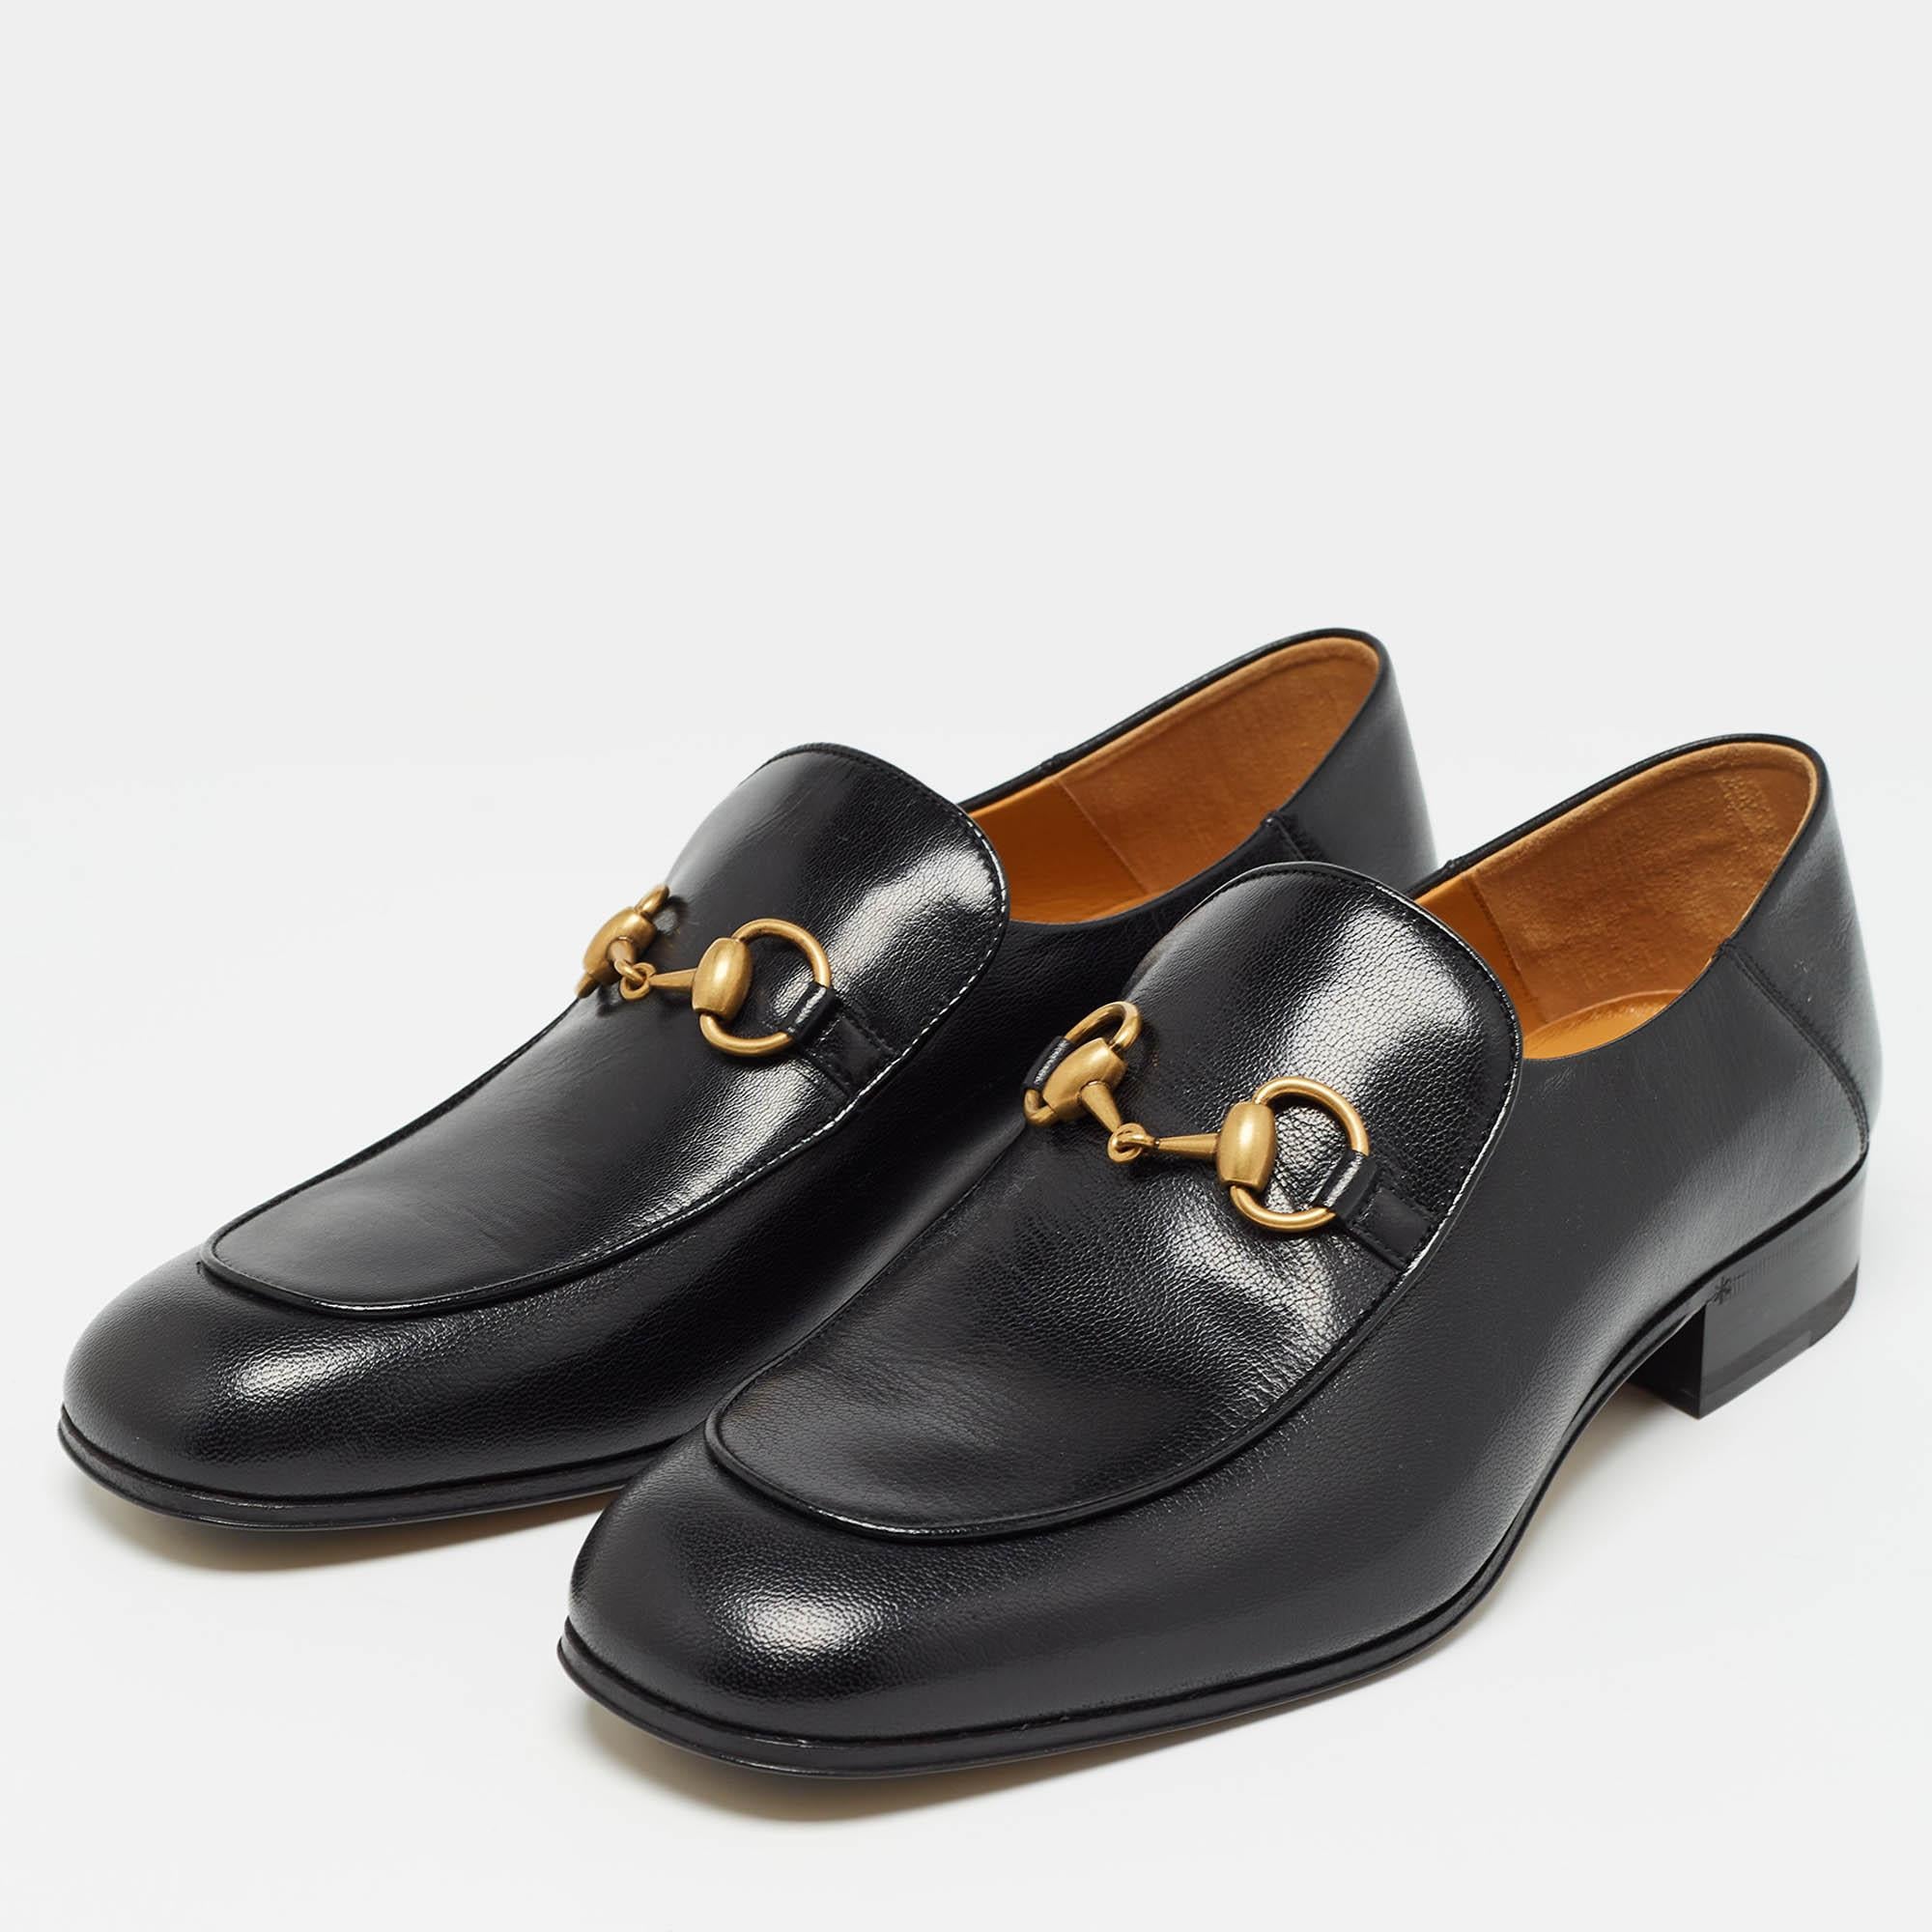 Gucci Black Leather Horsebit Foldable Loafers Size 41 2